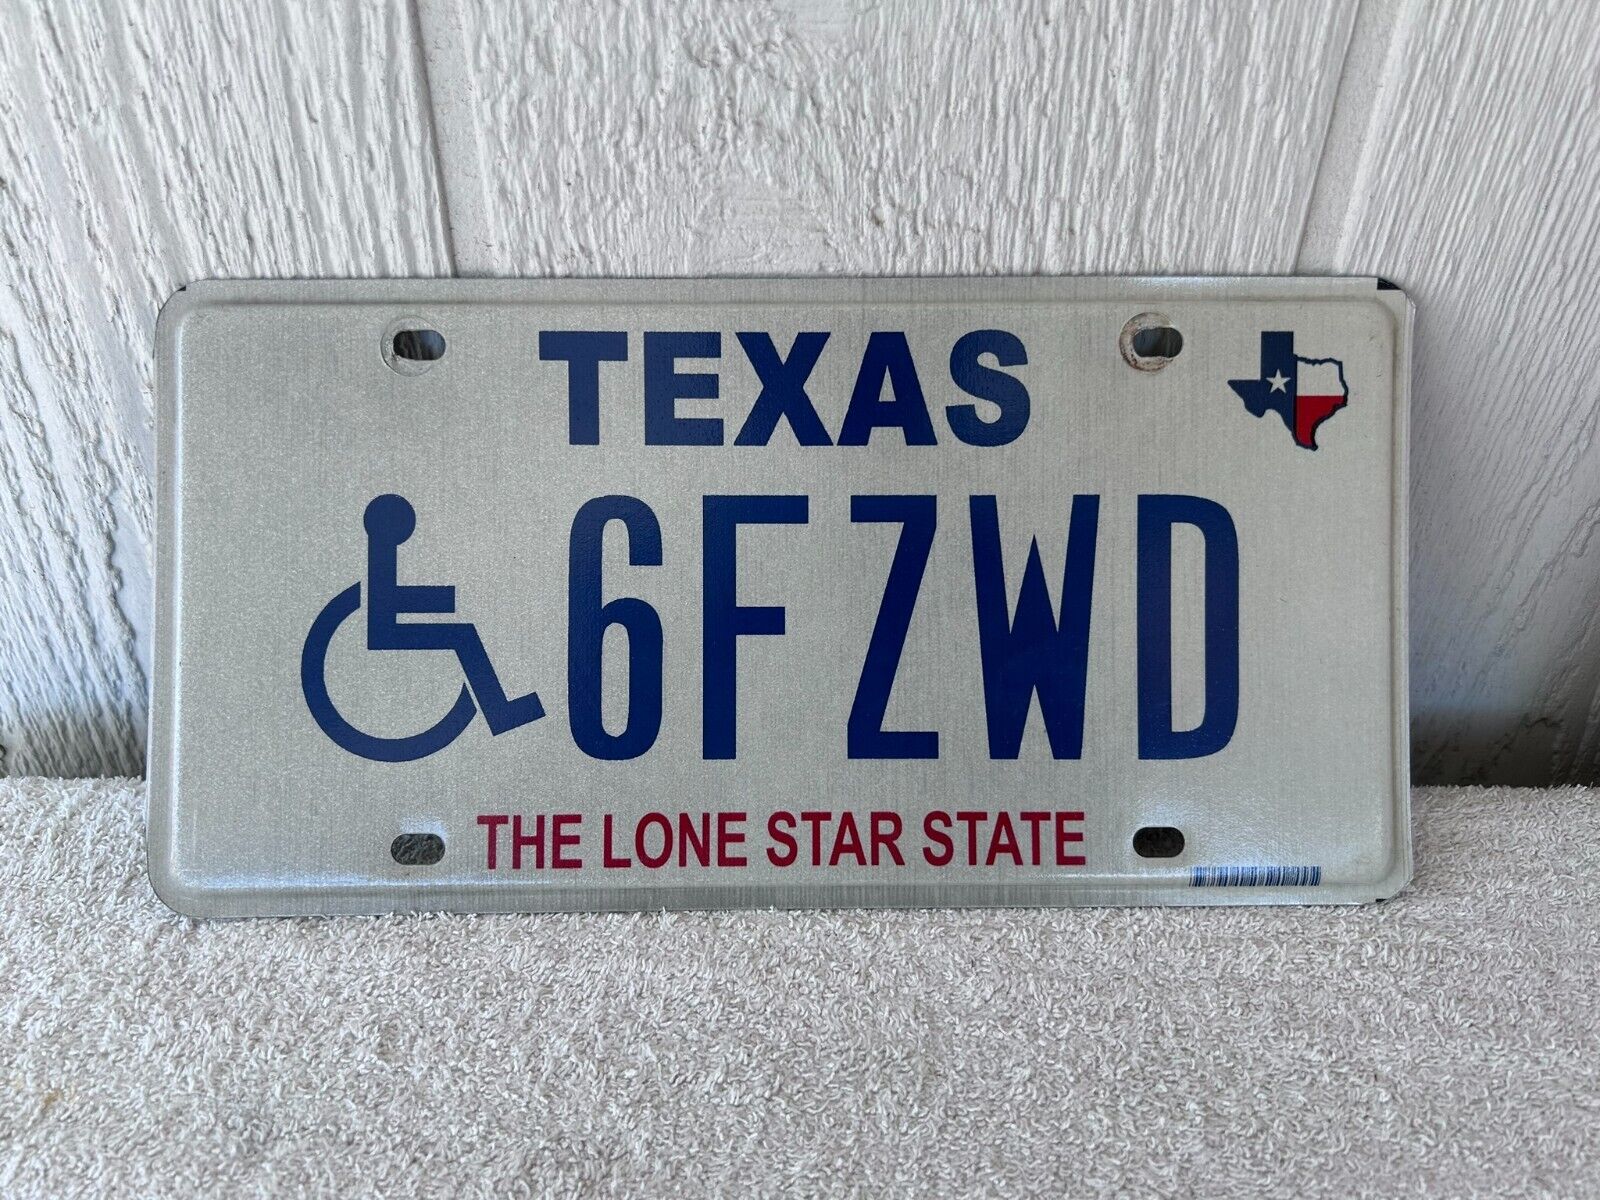 TEXAS Lone Star State Disabled Handicap Wheelchair 6FZWD License Plate Expired